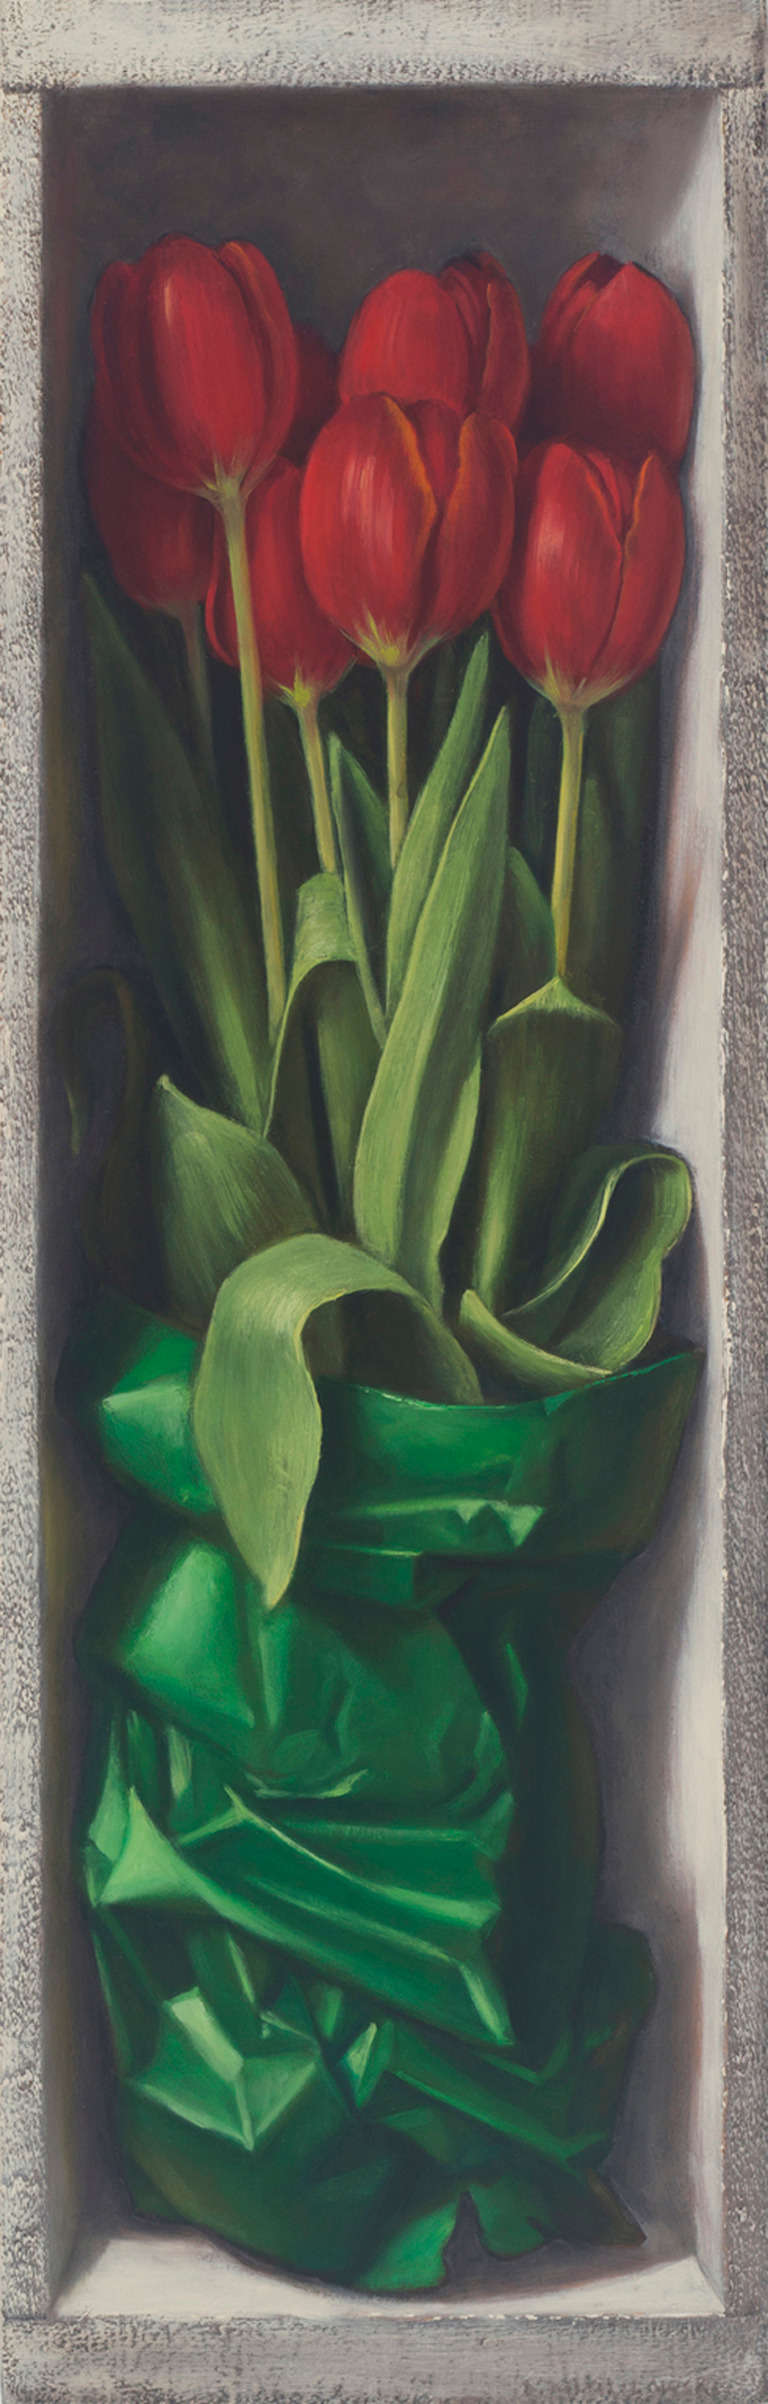 Denise Mickilowski Landscape Painting - Tulips with Green Tissue